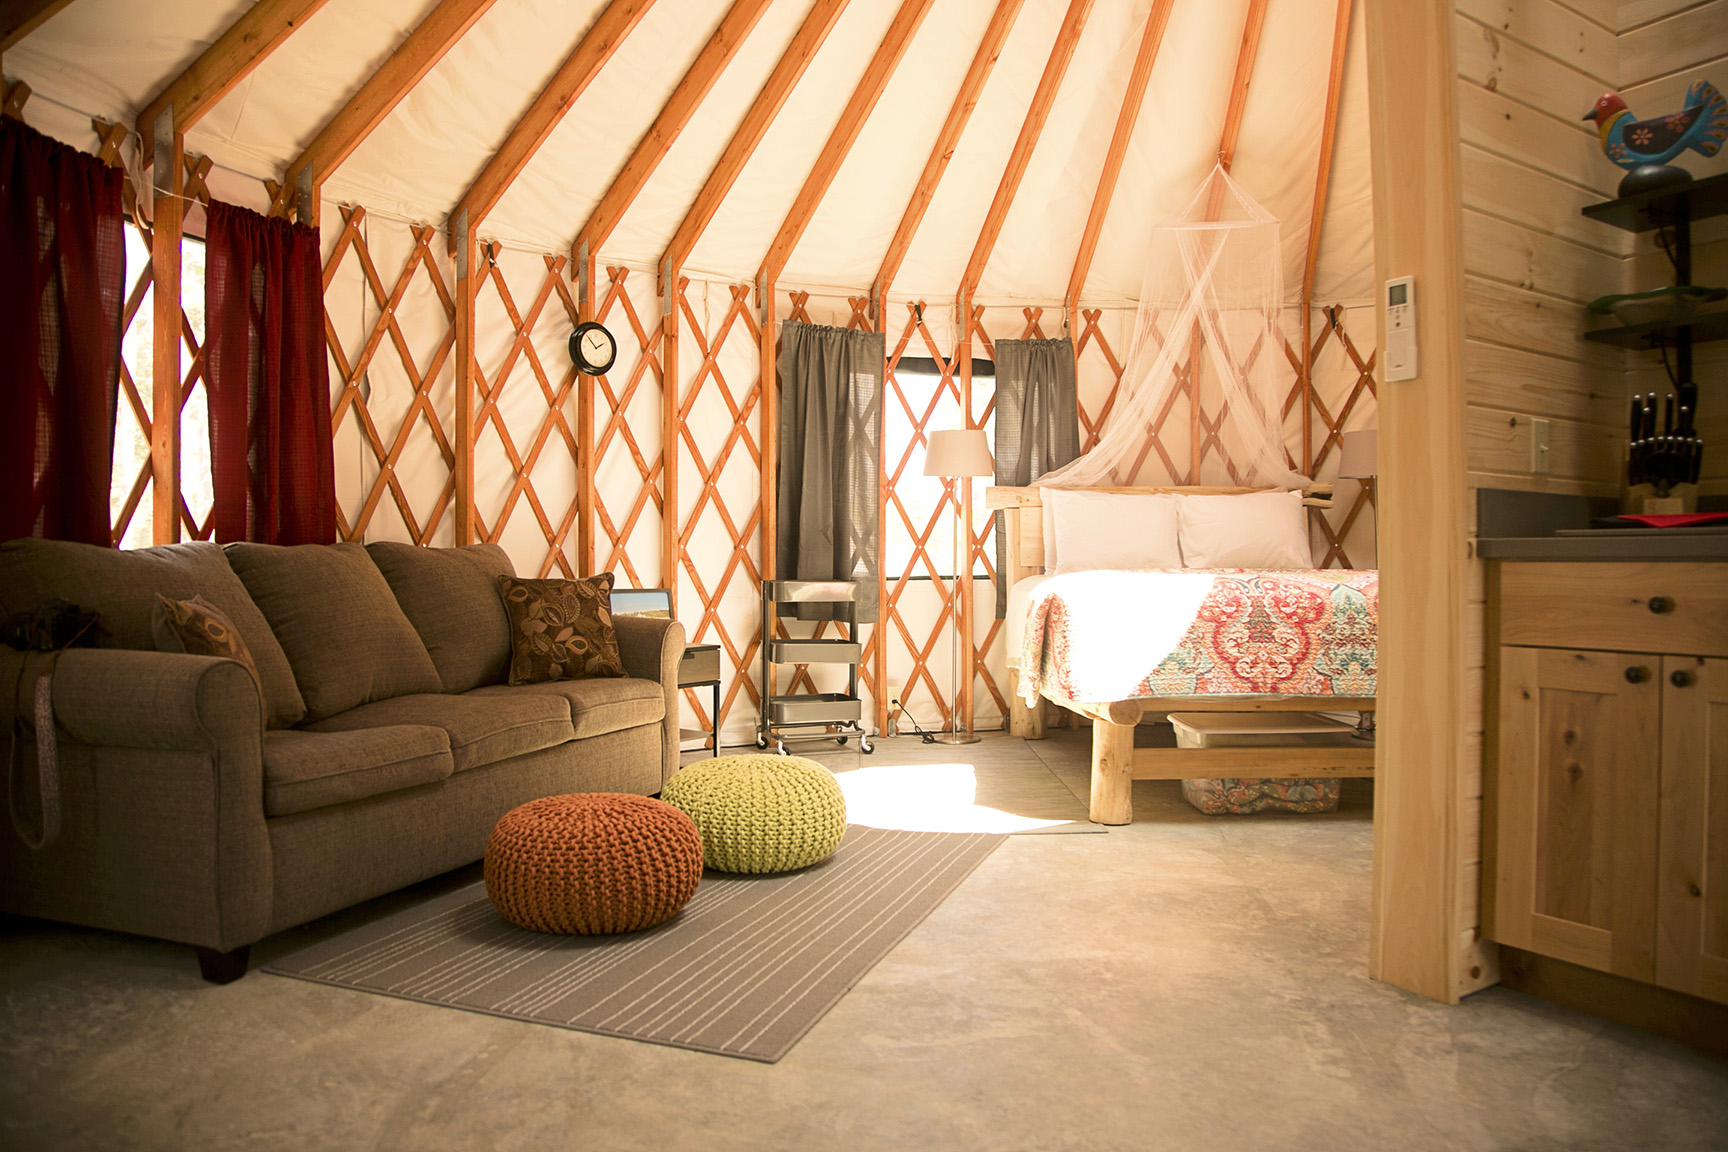 Acadia Yurts is located on the west side of Mount Desert Island, which locals call the “quiet side” of the island. 